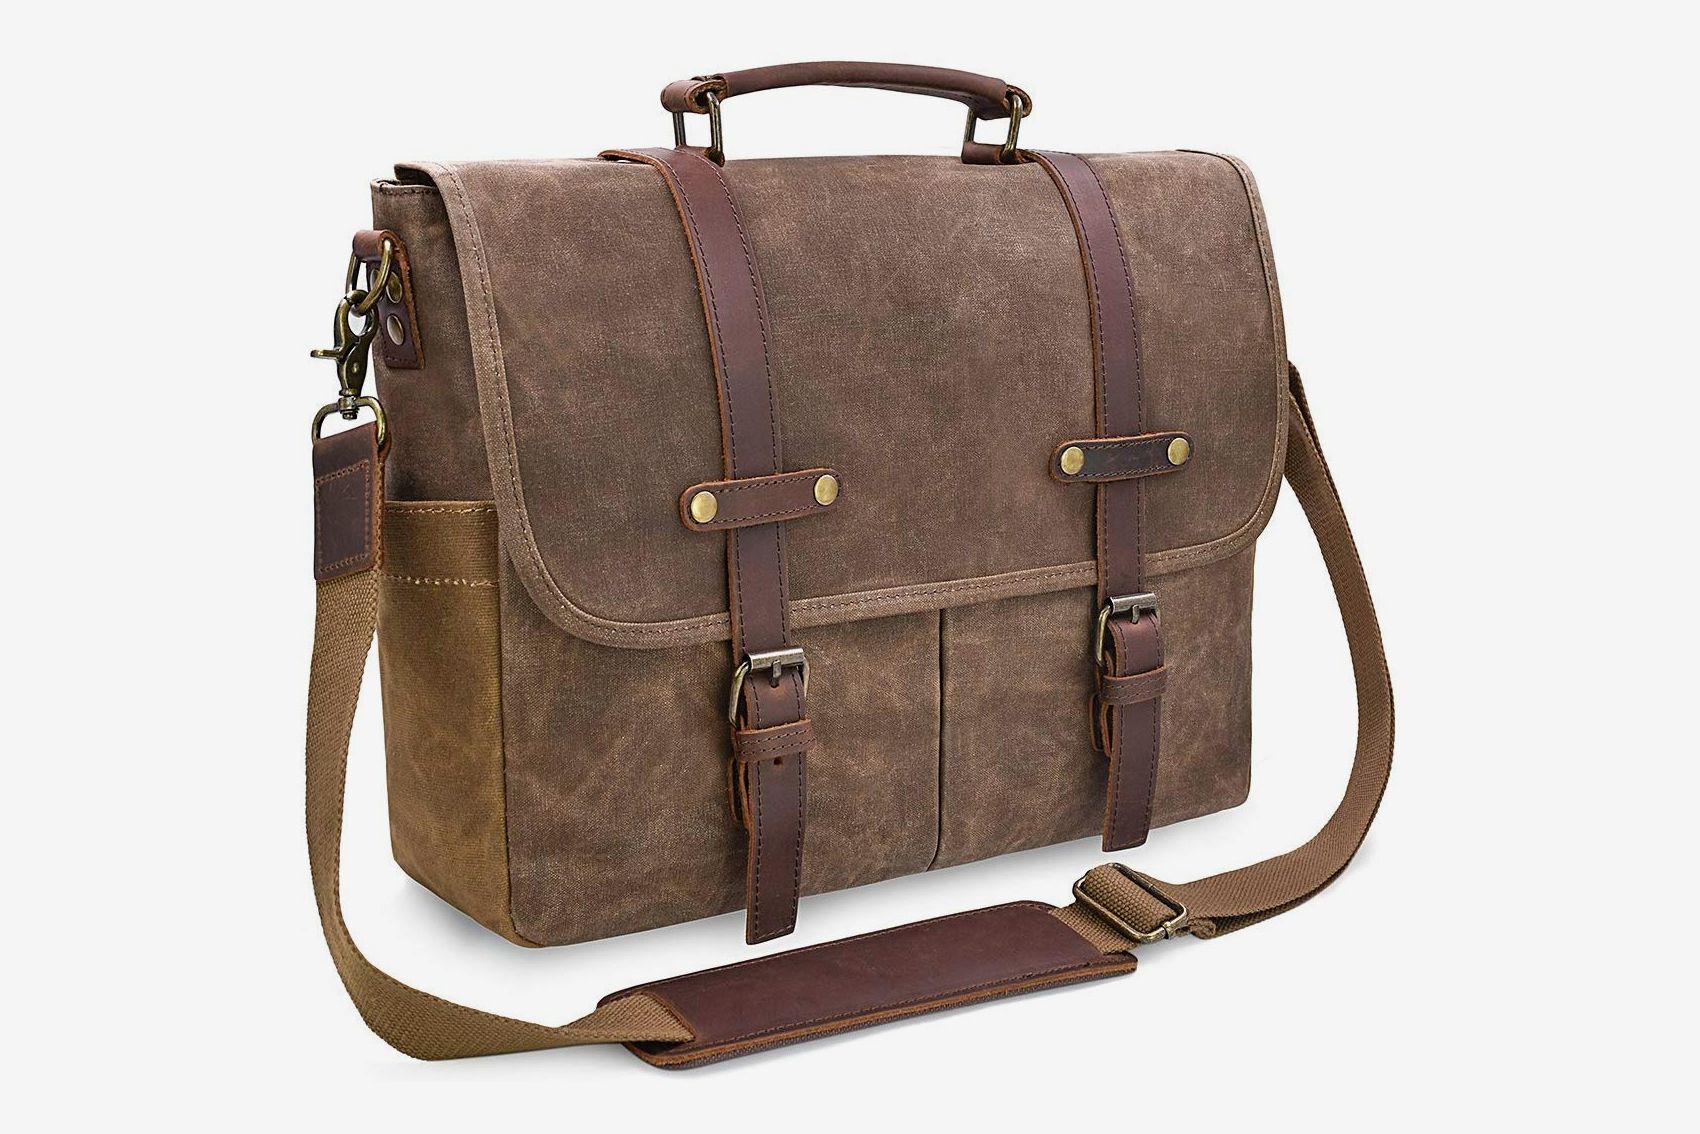 Bags & Purses Luggage & Travel Briefcases & Attaches Men's Bag Genuine Real Leather Men Briefcase for Laptop Messenger Bag Business Portfolio for Document Doctor Lawyer bag A4 bag for papers 